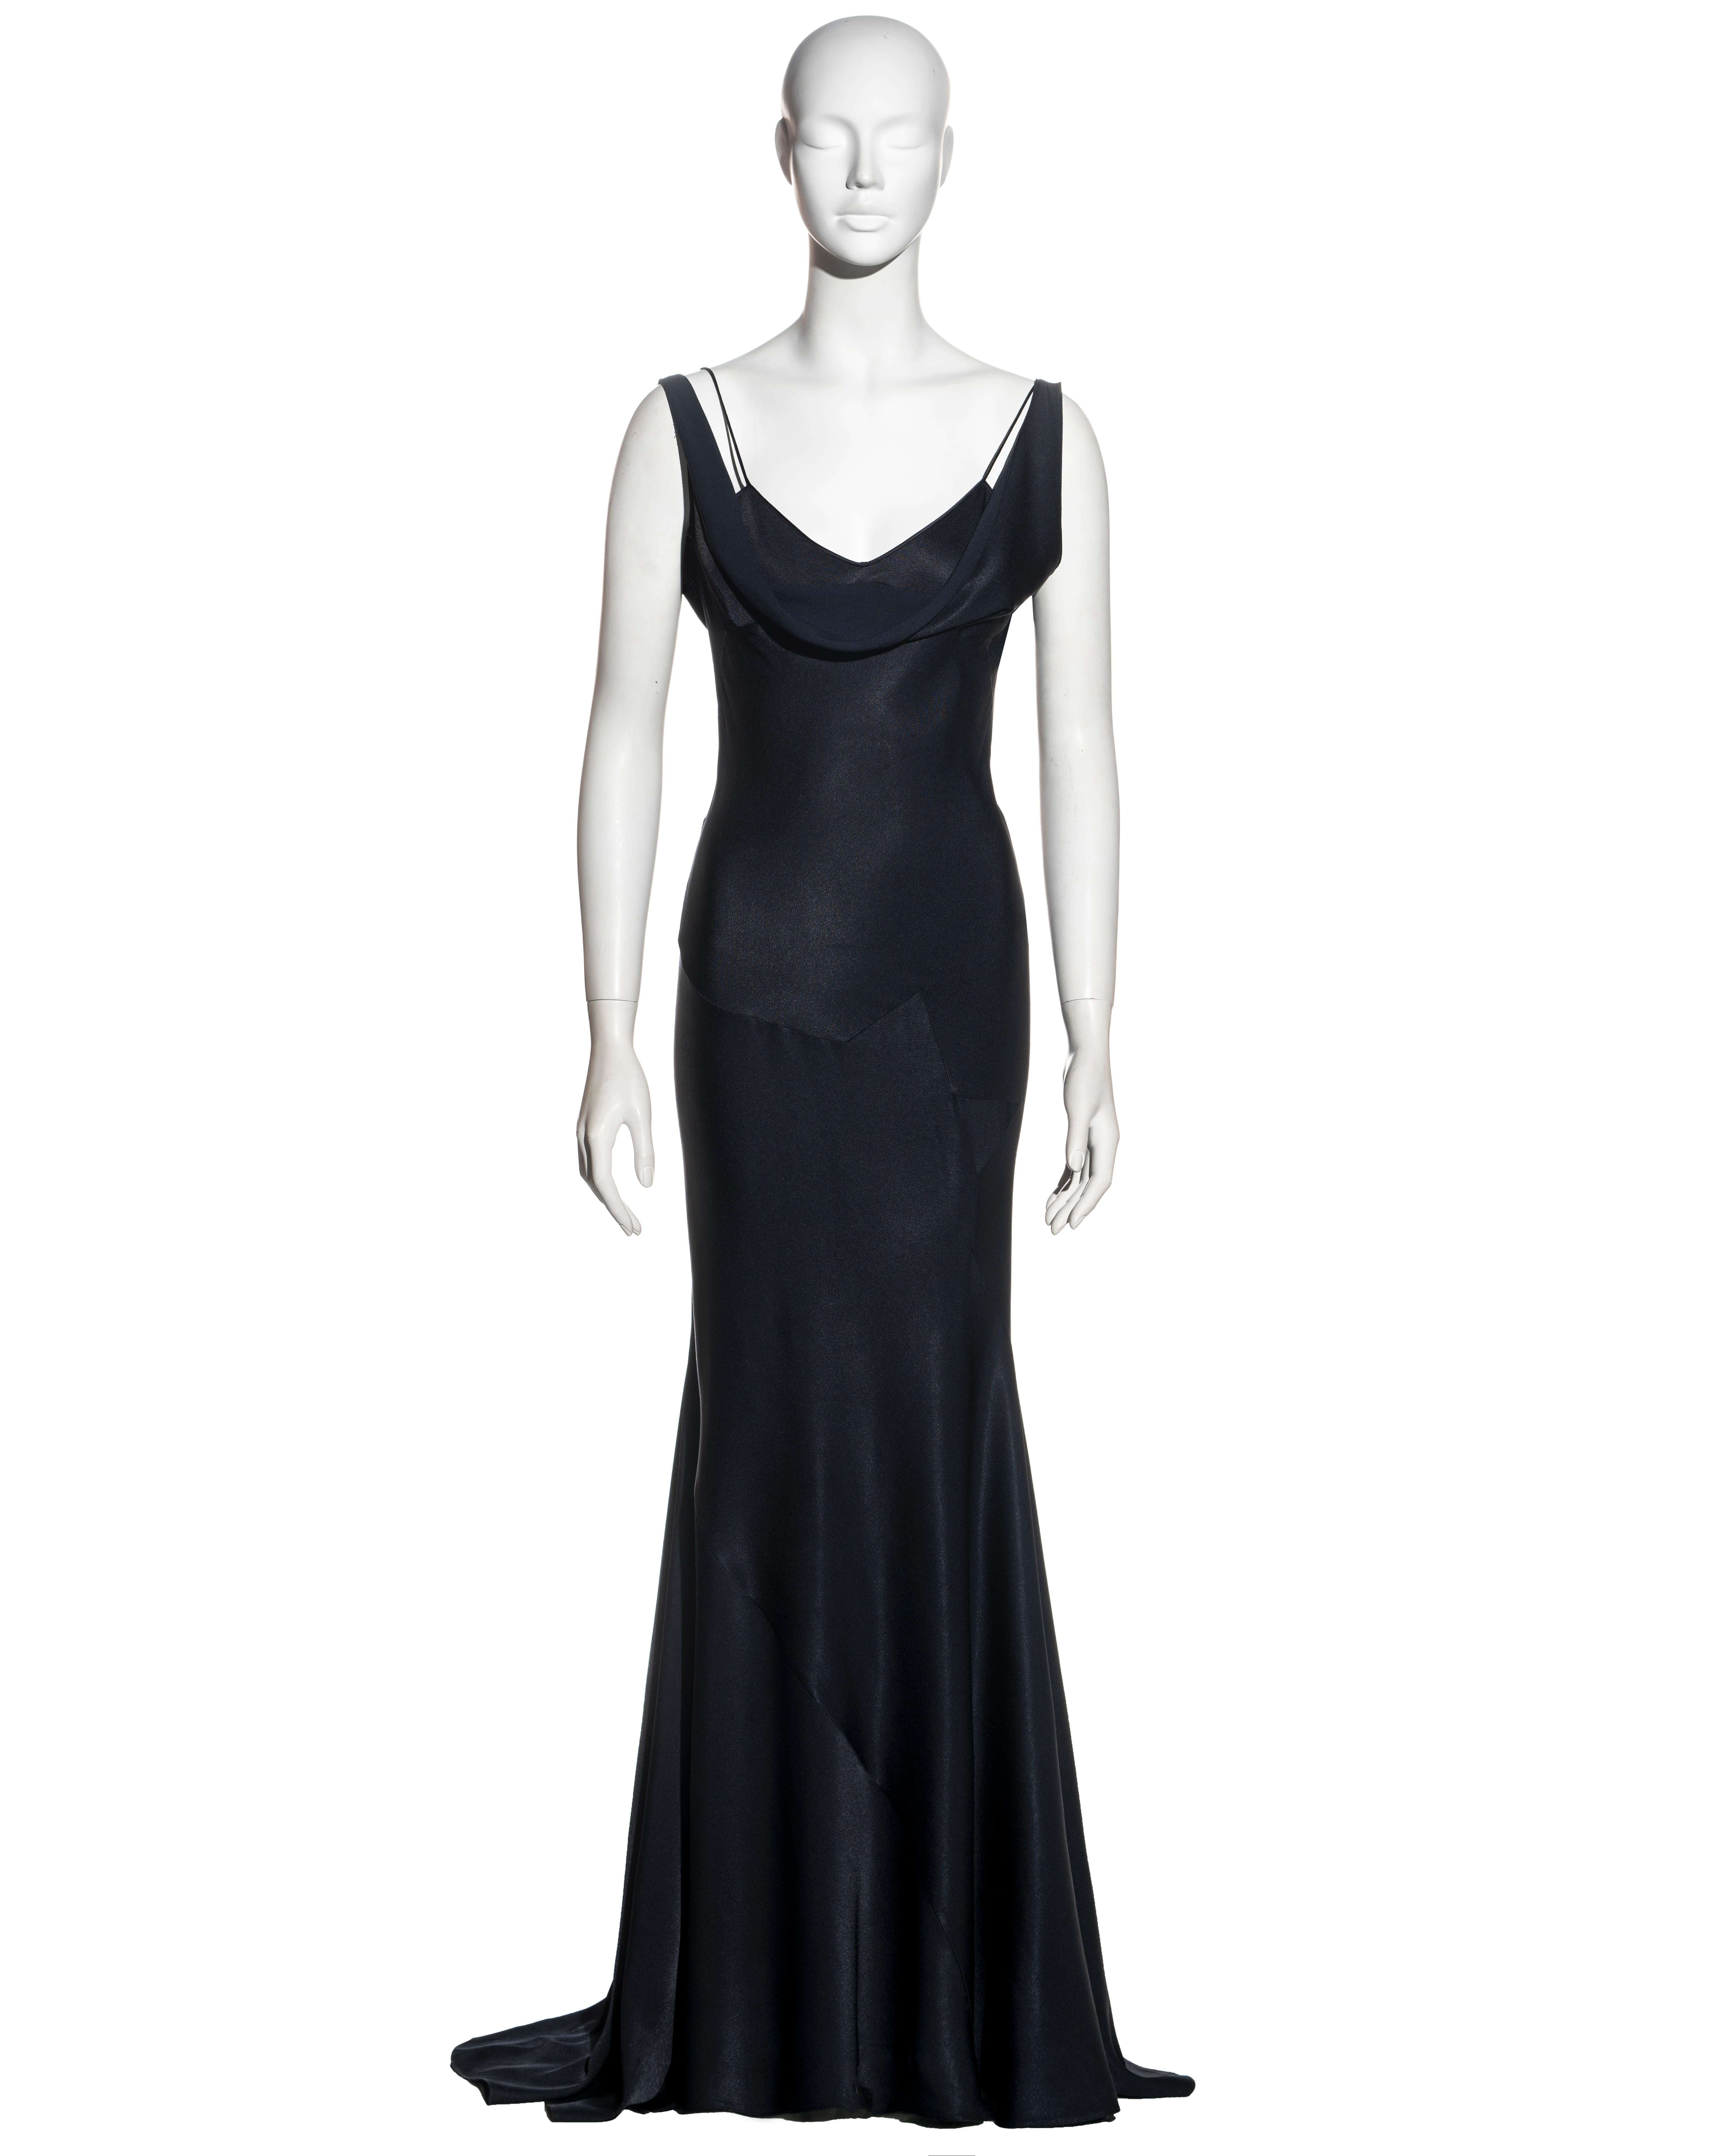 ▪ John Galliano midnight blue bias cut evening dress 
▪  Demi-star-shaped bias insert
▪ Draped cowls to front and back of bodice
▪ Spaghetti and off-shoulder straps 
▪ Floor length skirt with train
▪ FR 38 / US 6
▪ Fall-Winter 1995
▪ 68% Acetate,